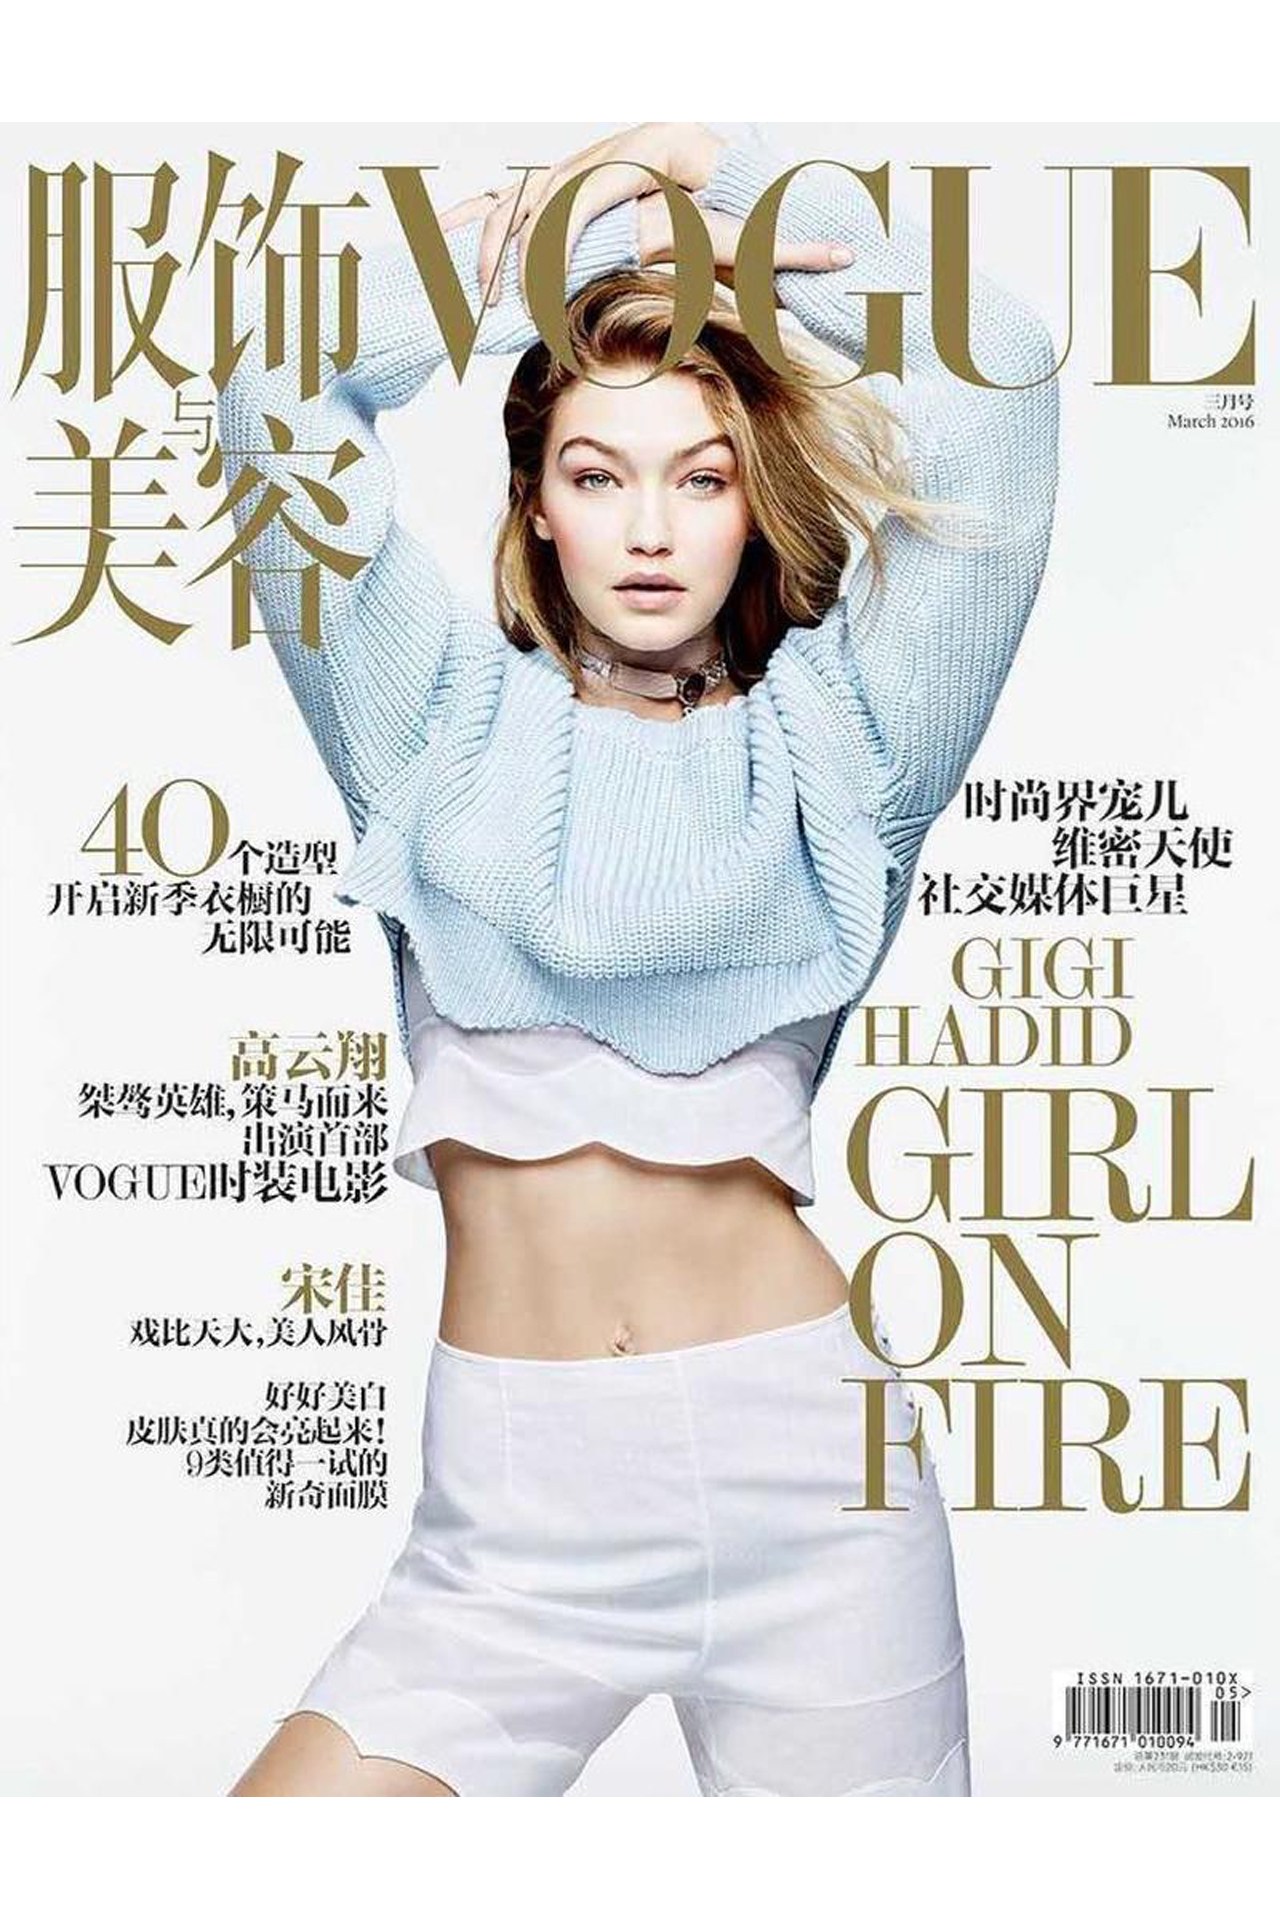 Beautiful Blonde American Fashion Model Gigi Hadid Modeling For The Cover Of Vogue China And Vogue China Fashion Editorials Modeling As One Of The Highest Paid Models In The World. The World’s Highest Paid Models. The Top Earning Models In The World.